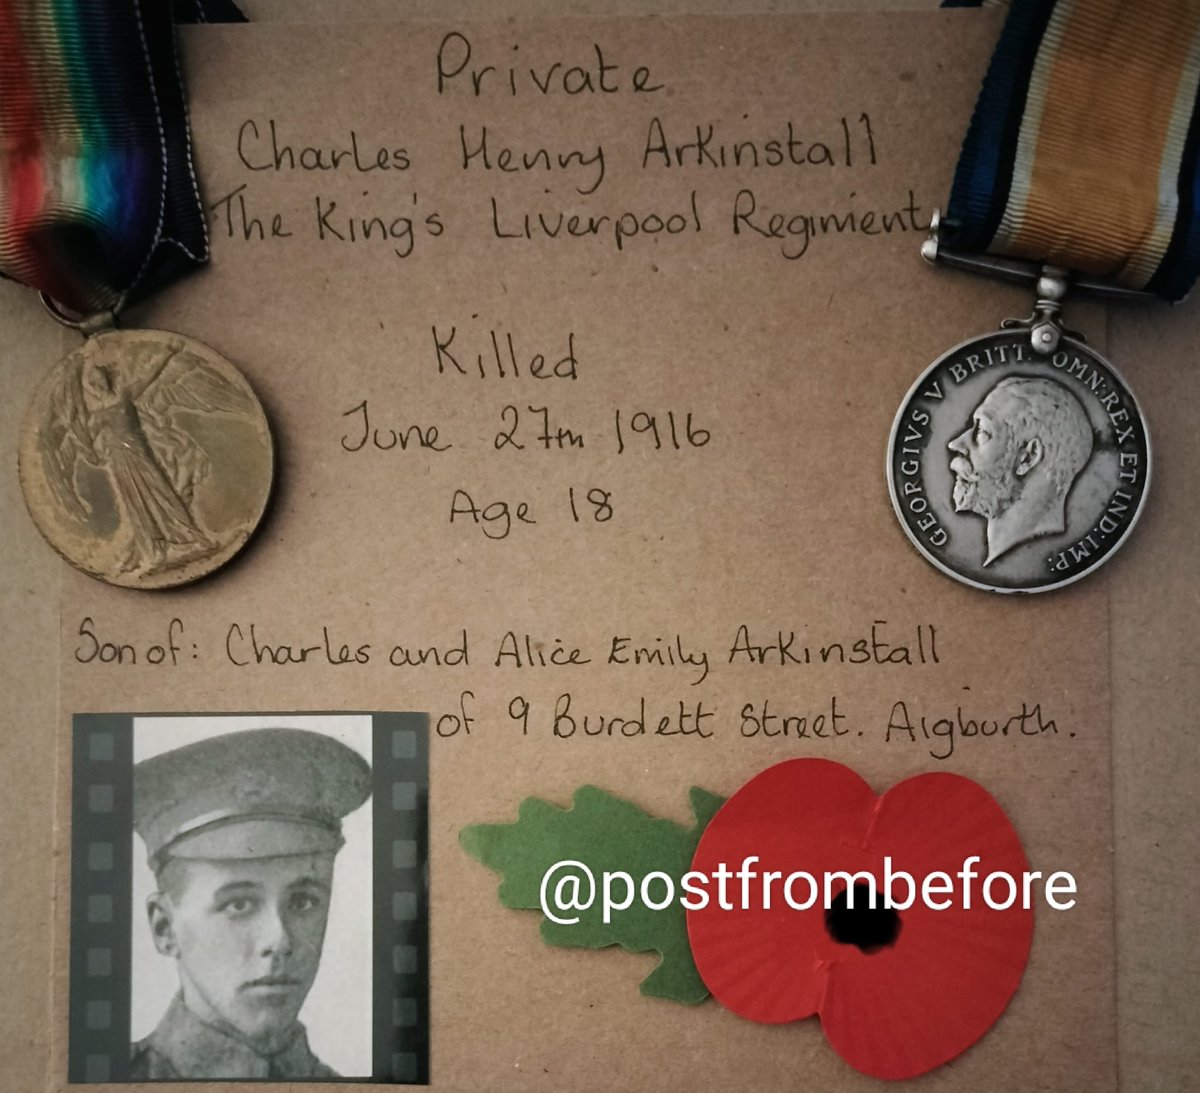 Our first delivery today is to Burdett Street Aigburth remembering Charles Henry Arkinstall of the King's Liverpool Regiment who died on 27 June 1916 #LestWeForget, #housethroughtime, #Aigburth, #oldliverpool